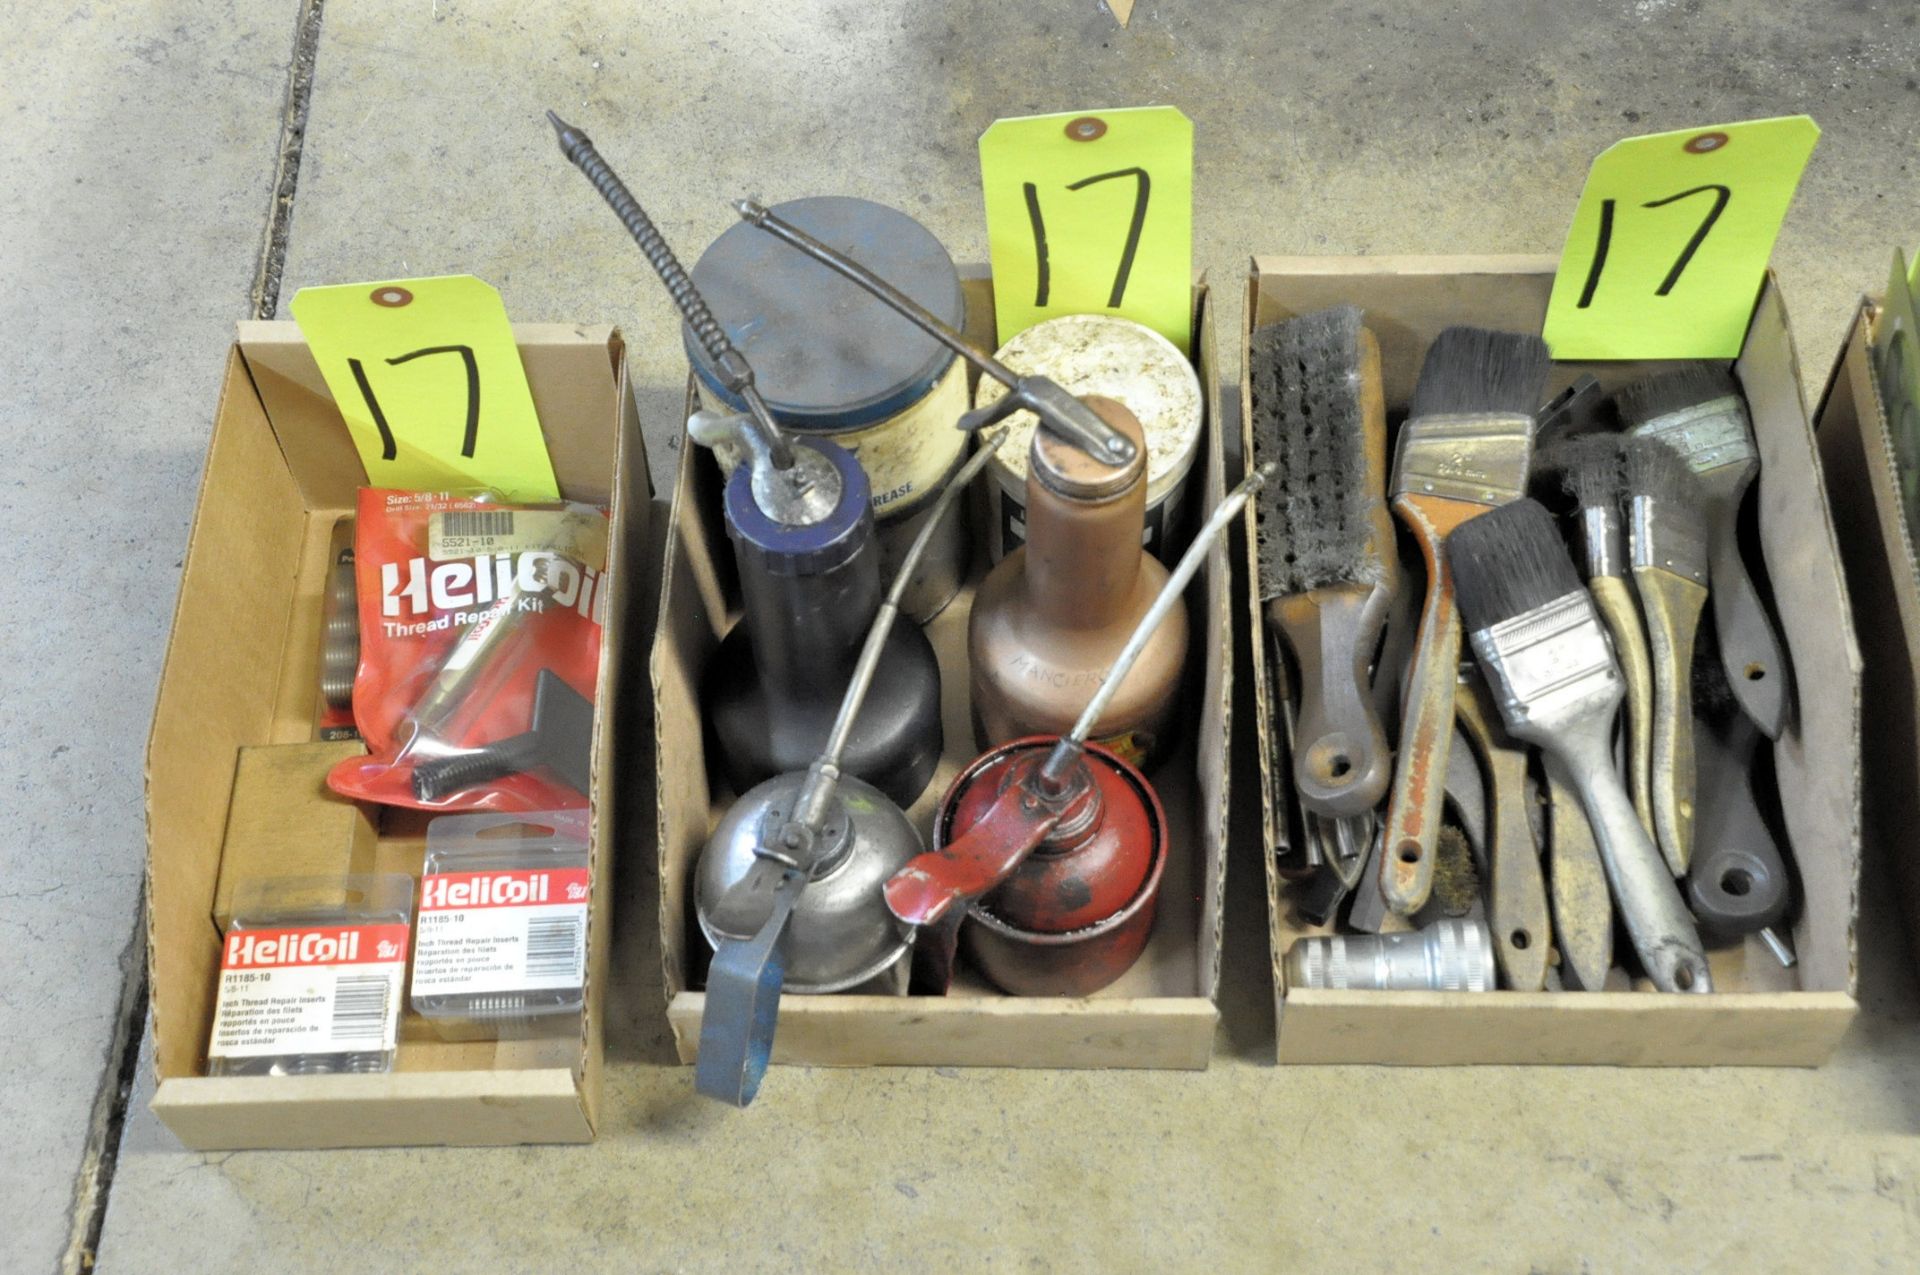 Lot-Fuses, Packing Paper, Oil Squirt Cans, Safety Gloves, Fire Blanket, Brushes, - Image 6 of 7